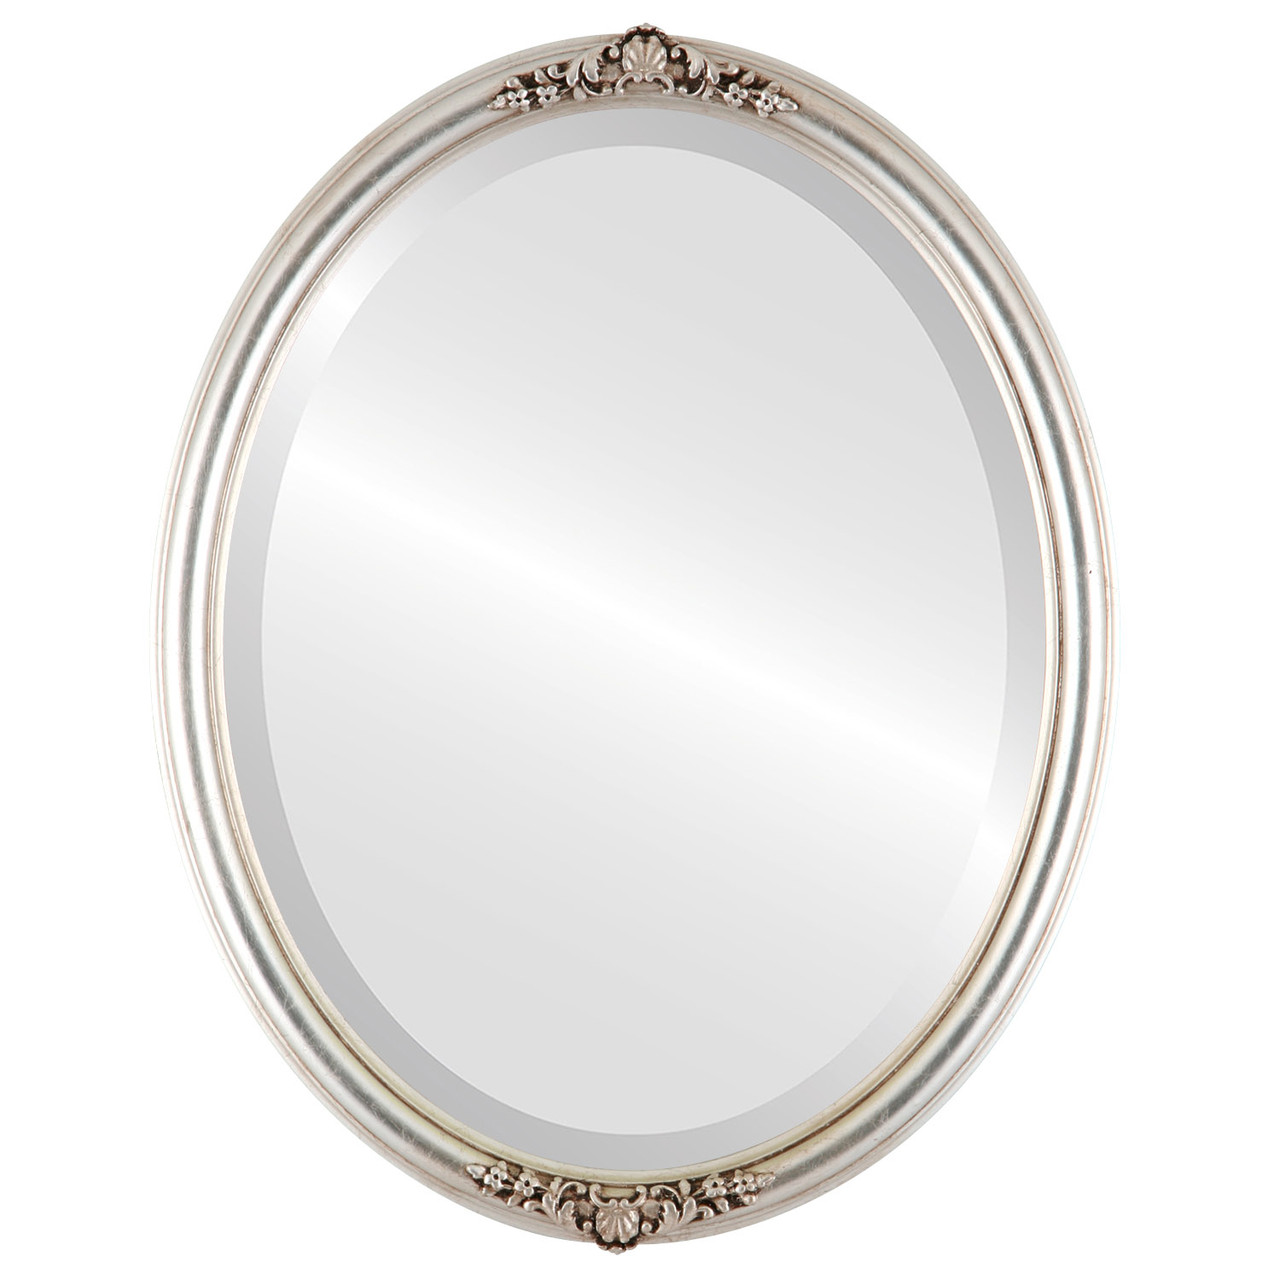 Vintage Brown Oval Mirrors from $151 Free Shipping